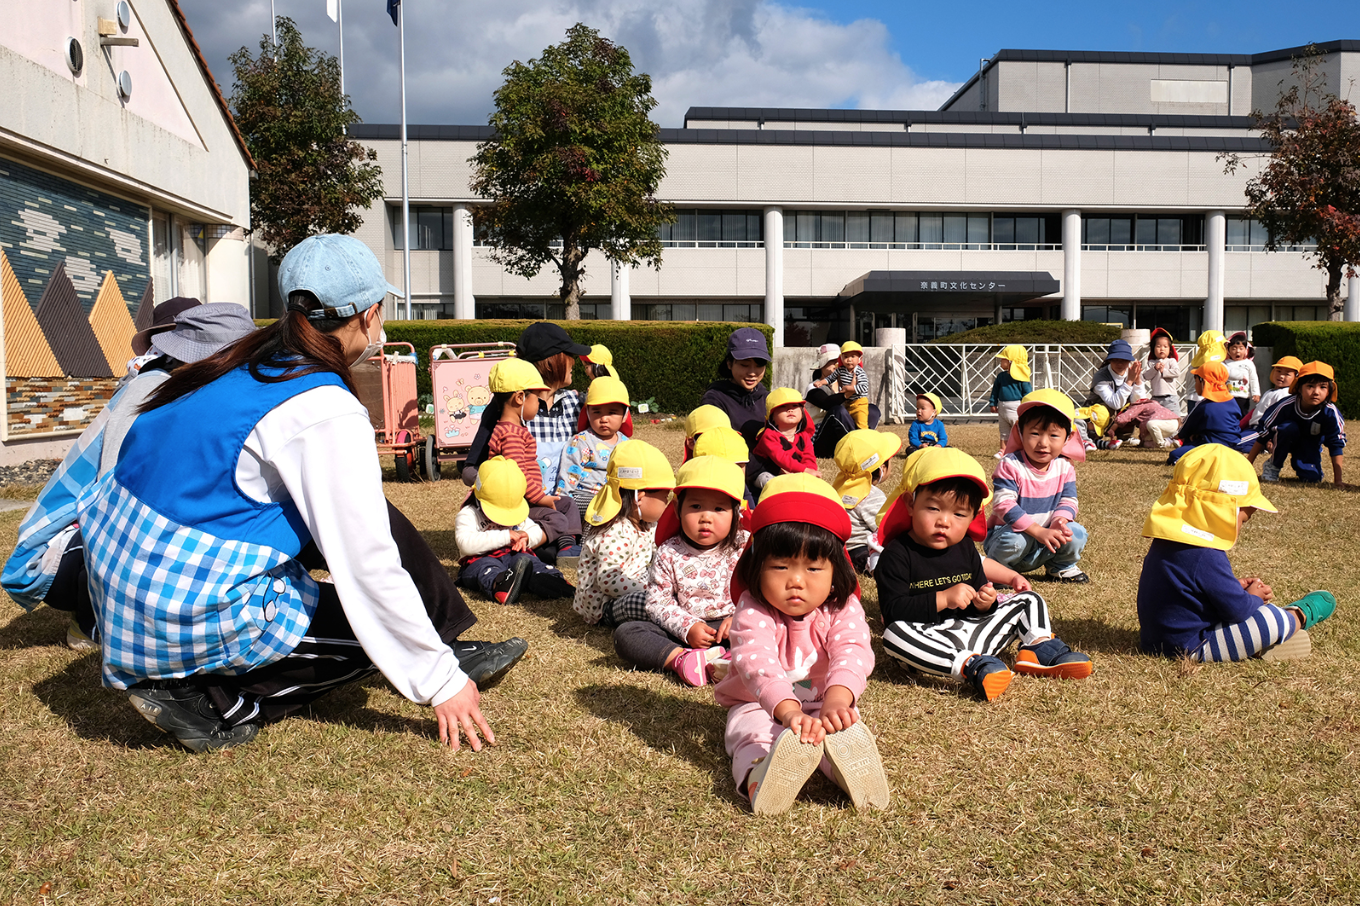 Kids play games with their siblings at the local preschool. Image by Emiko Jozuka. Japan, 2018.